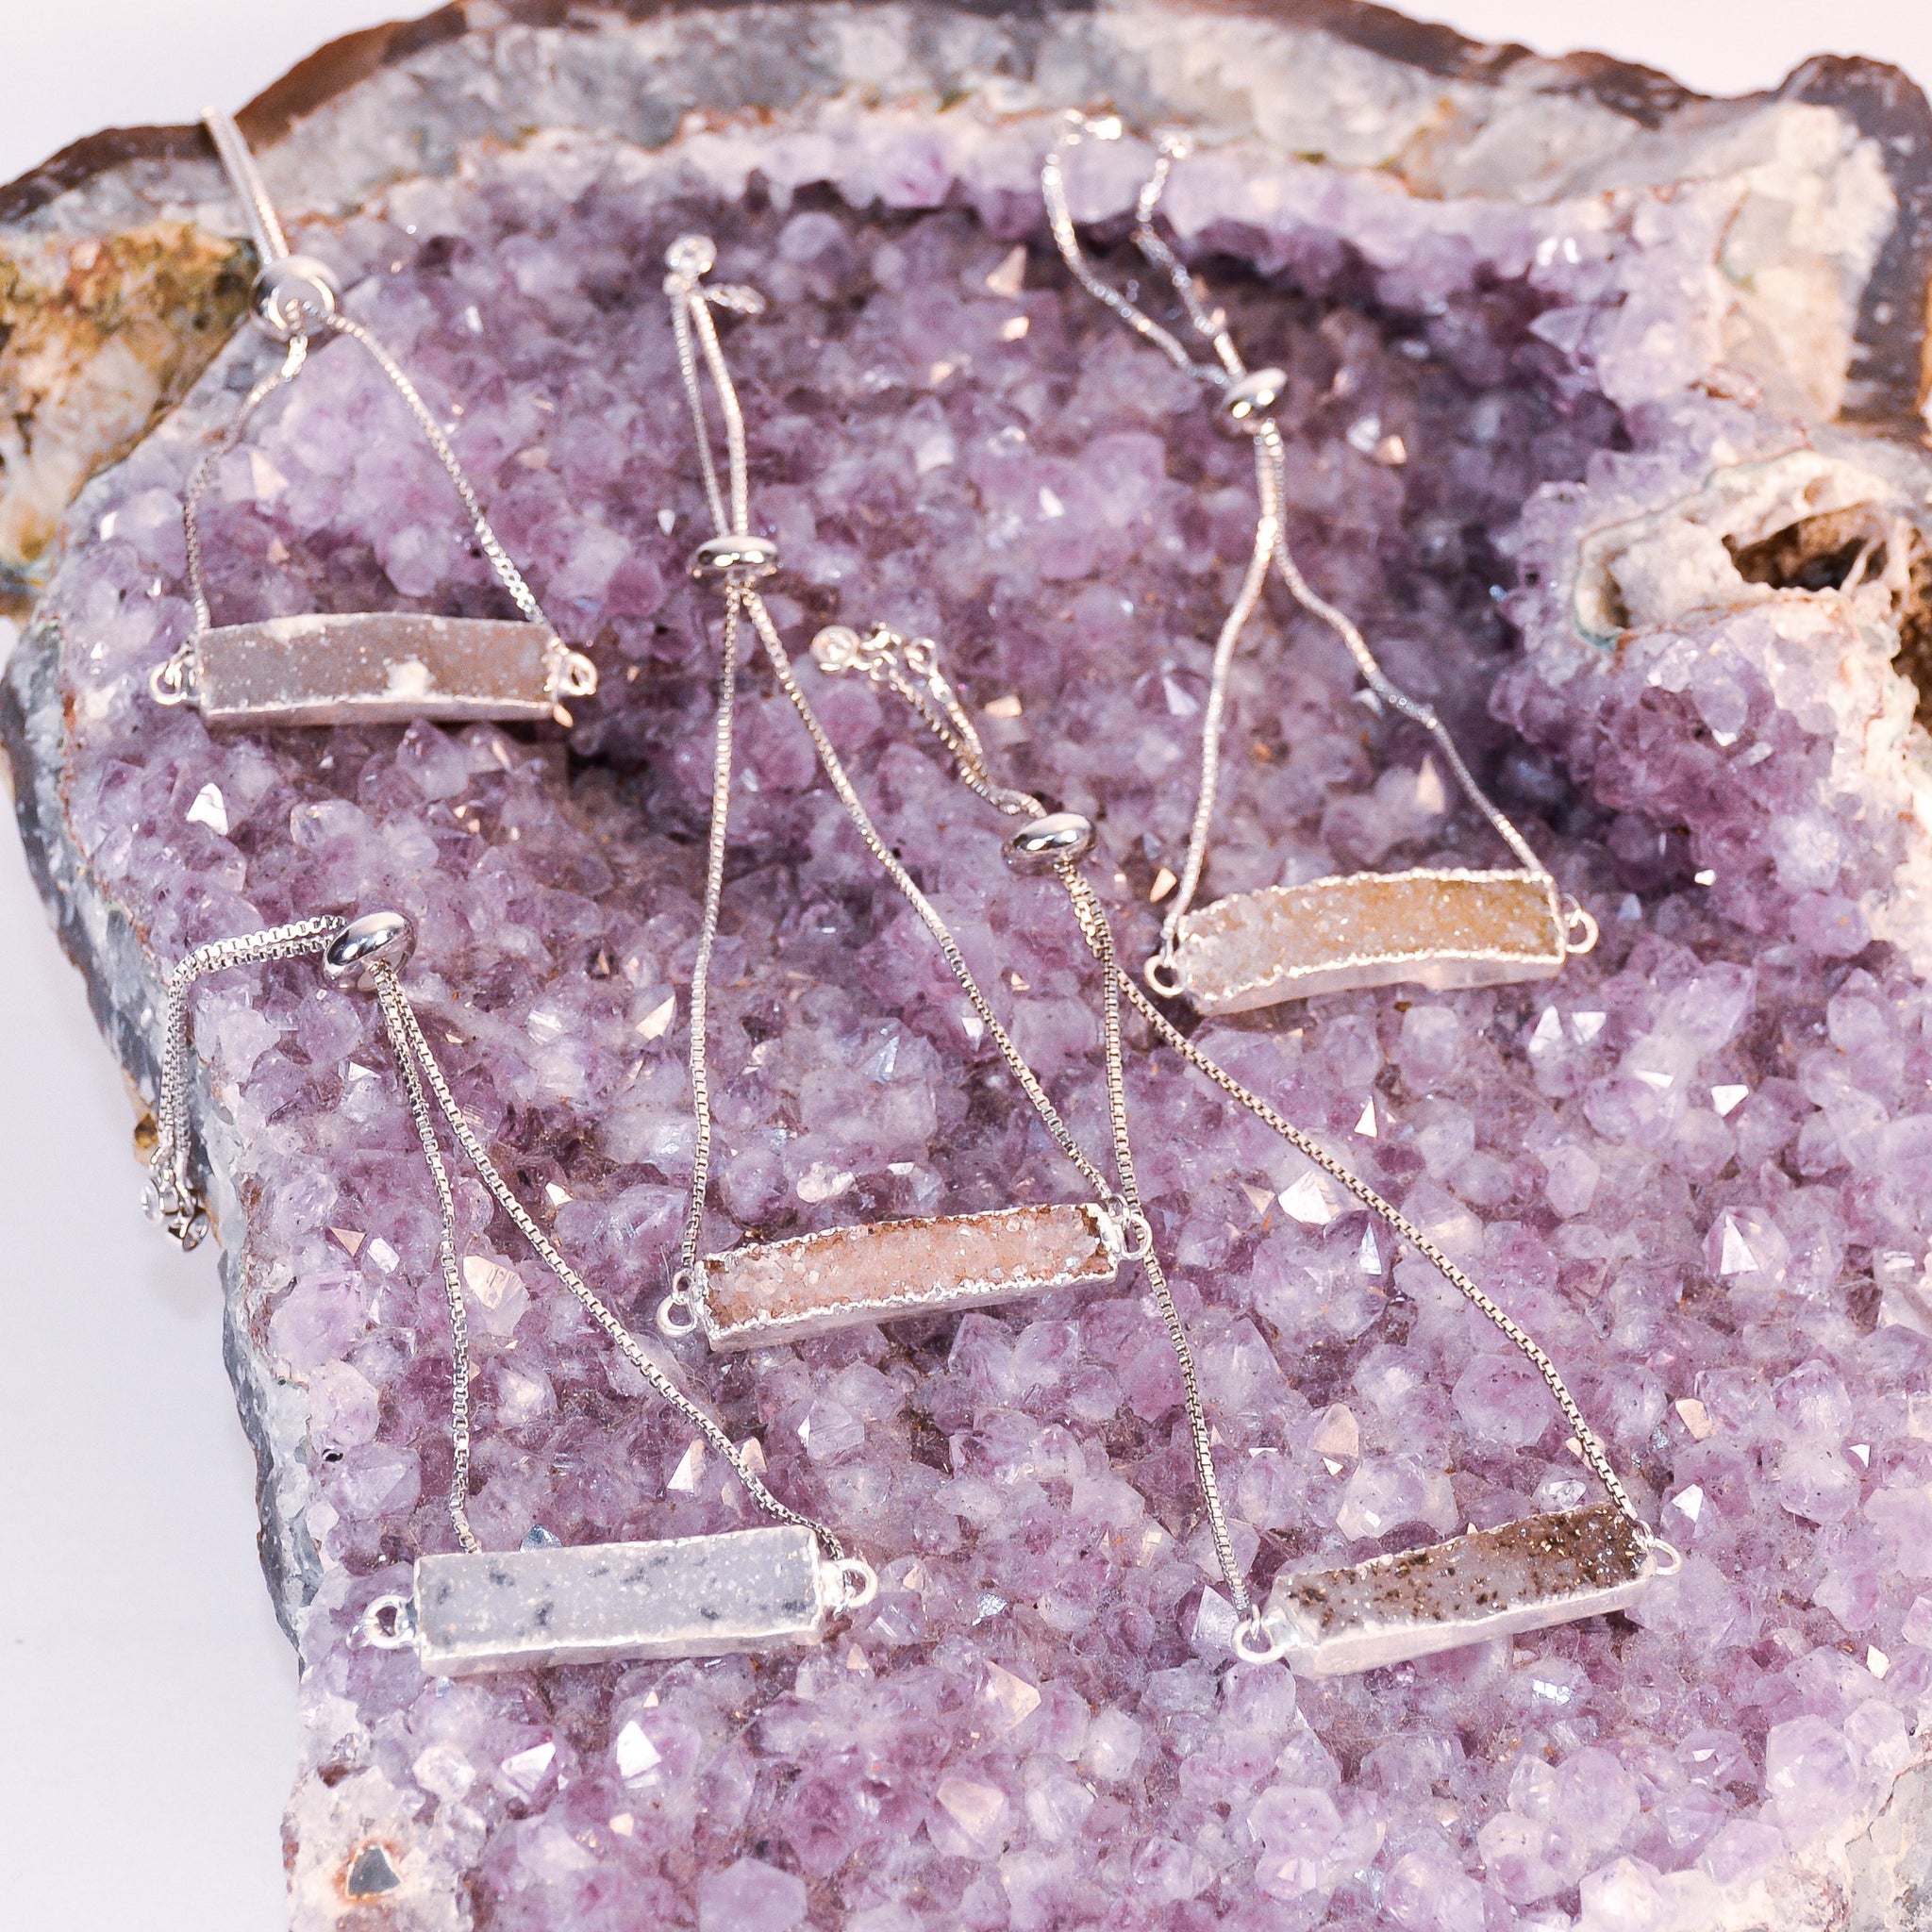 ･ﾟ✧*･ﾟ* SOLD OUT *･ﾟ*✧･ﾟ     Rectangular Druzy Bolo Bracelet in Silver